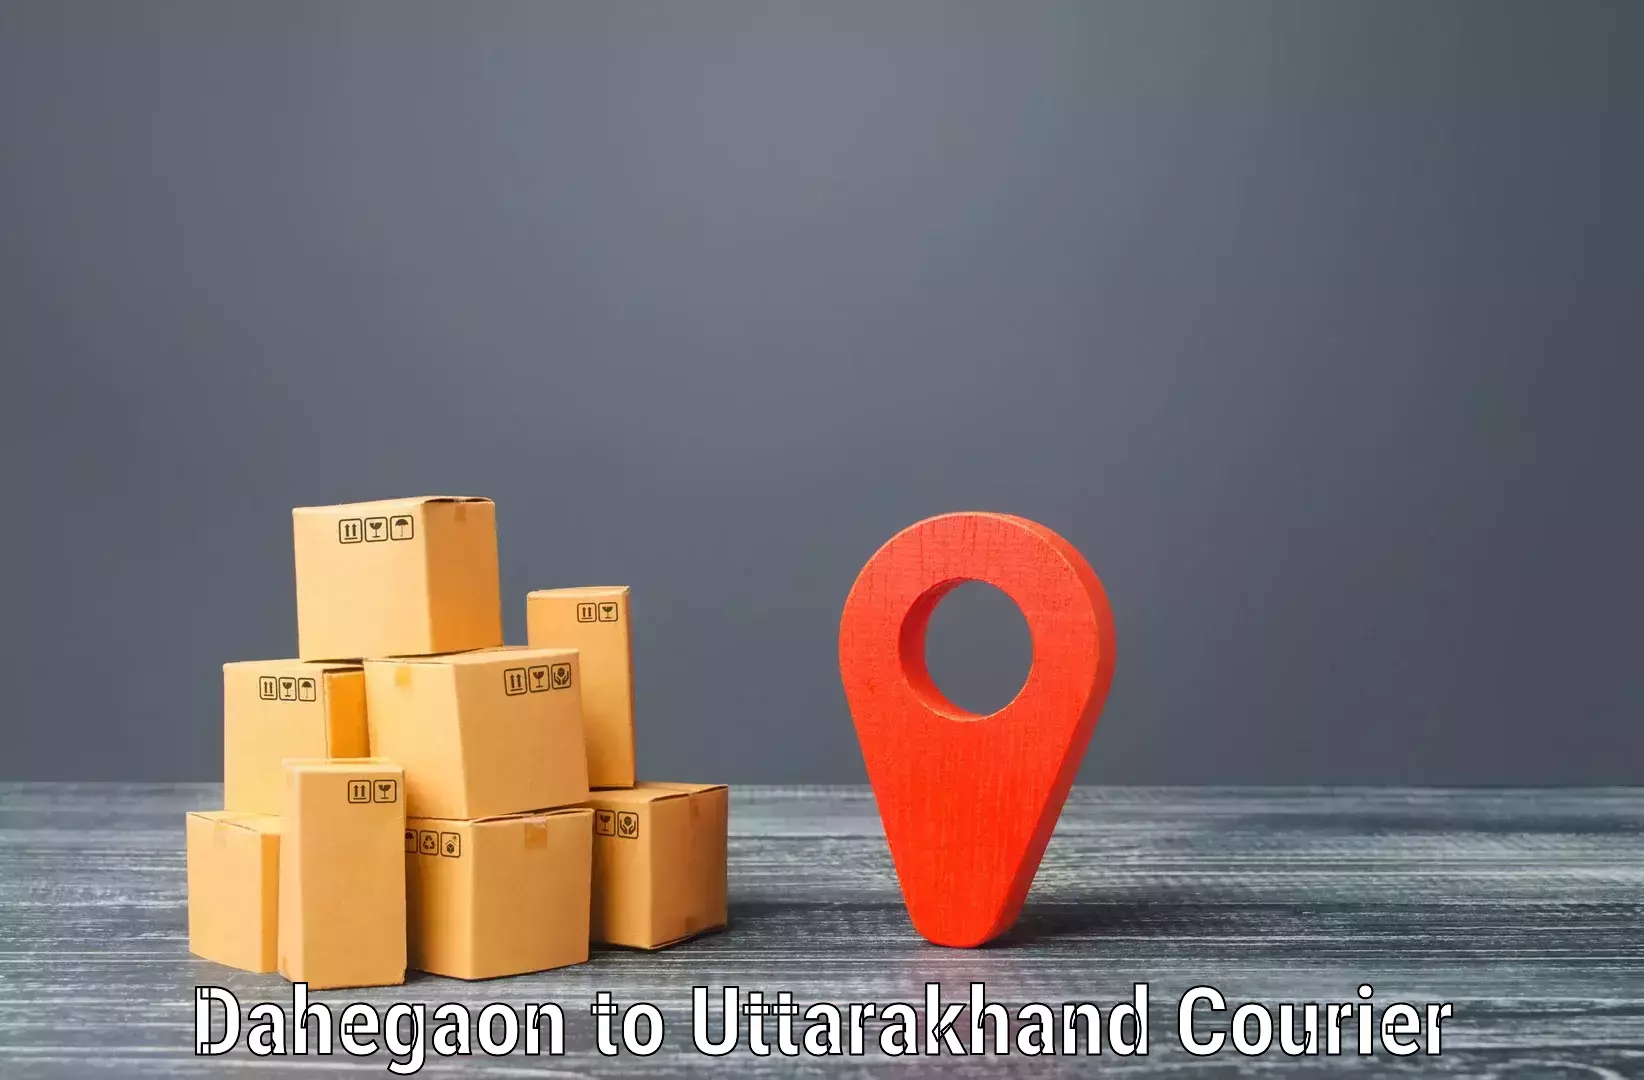 Modern courier technology Dahegaon to Bageshwar